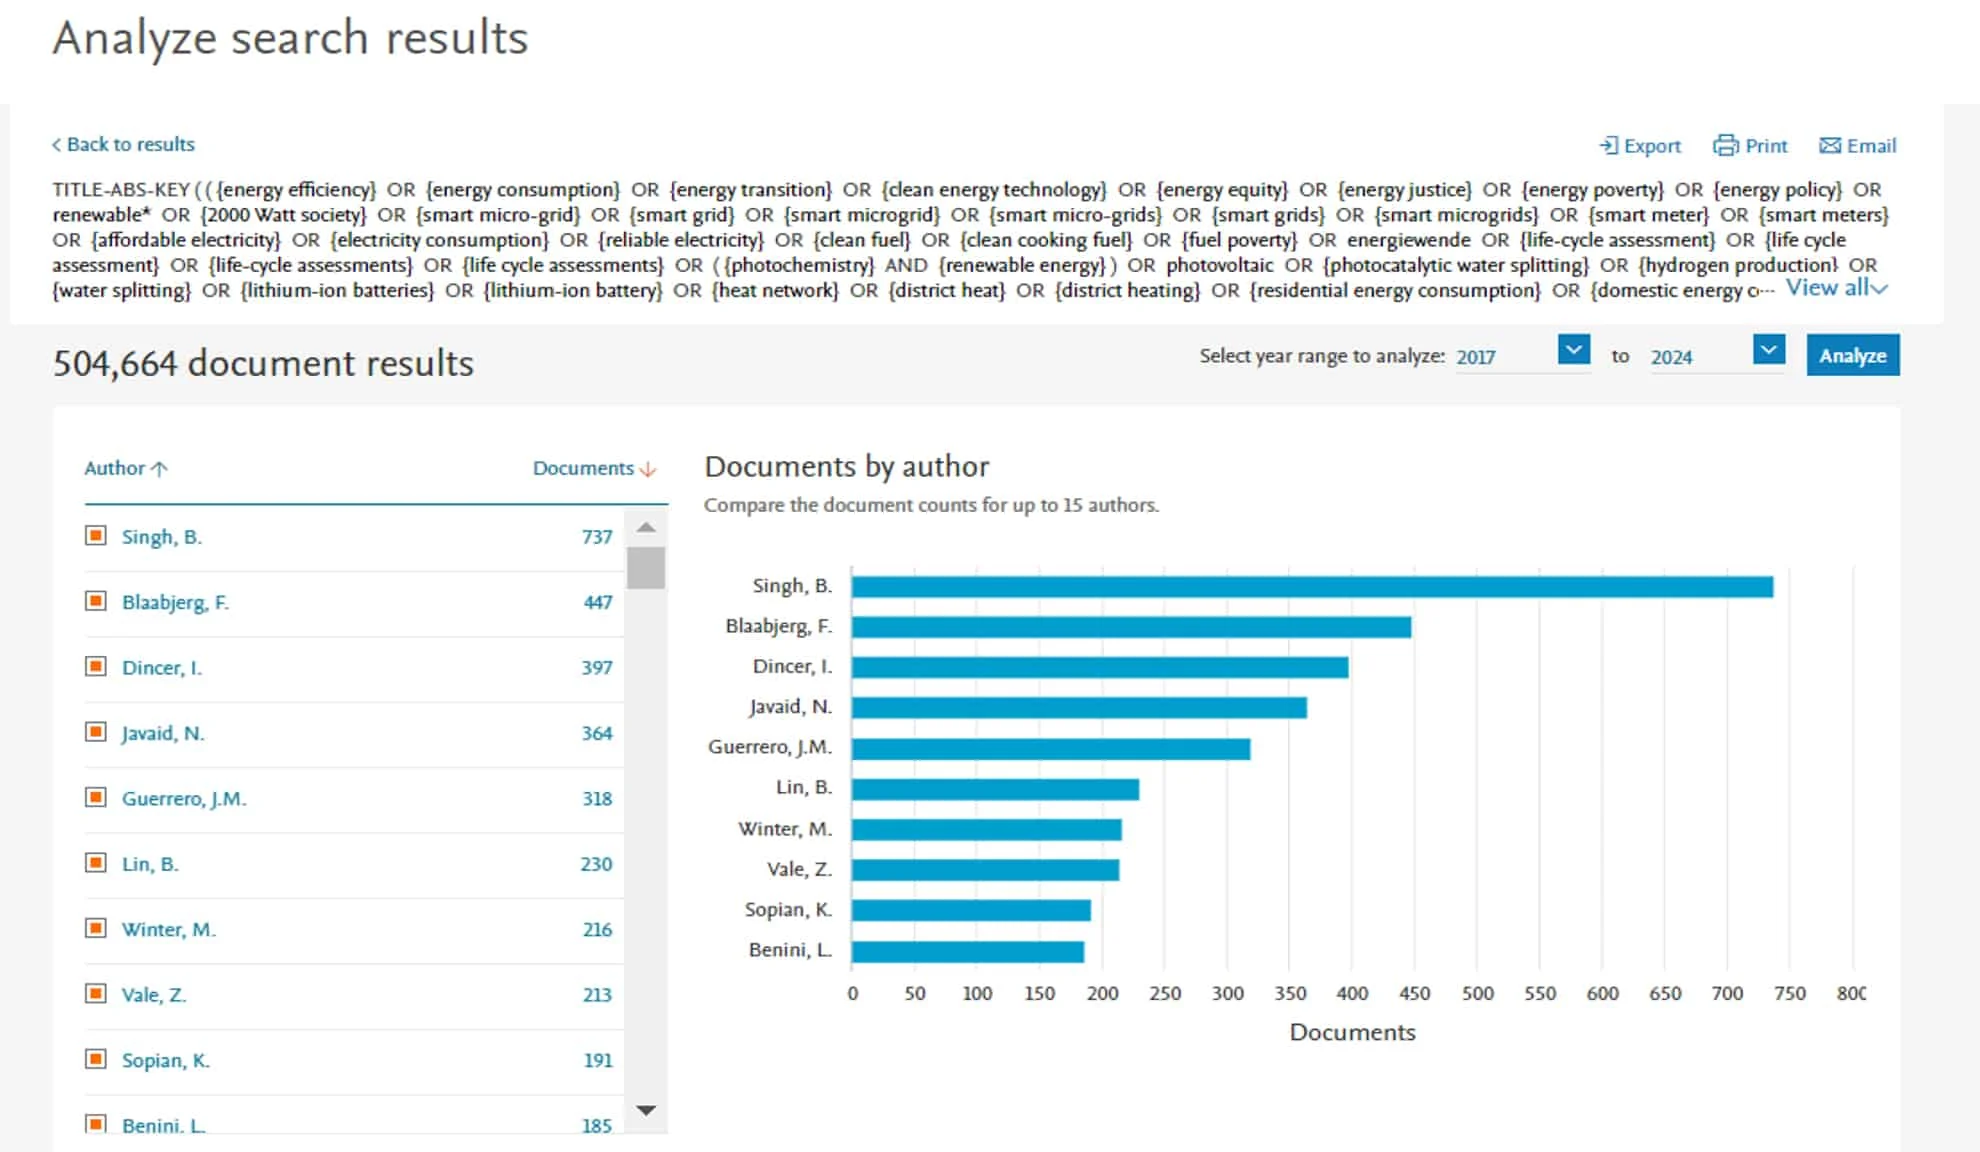 Analyze search results in Scopus